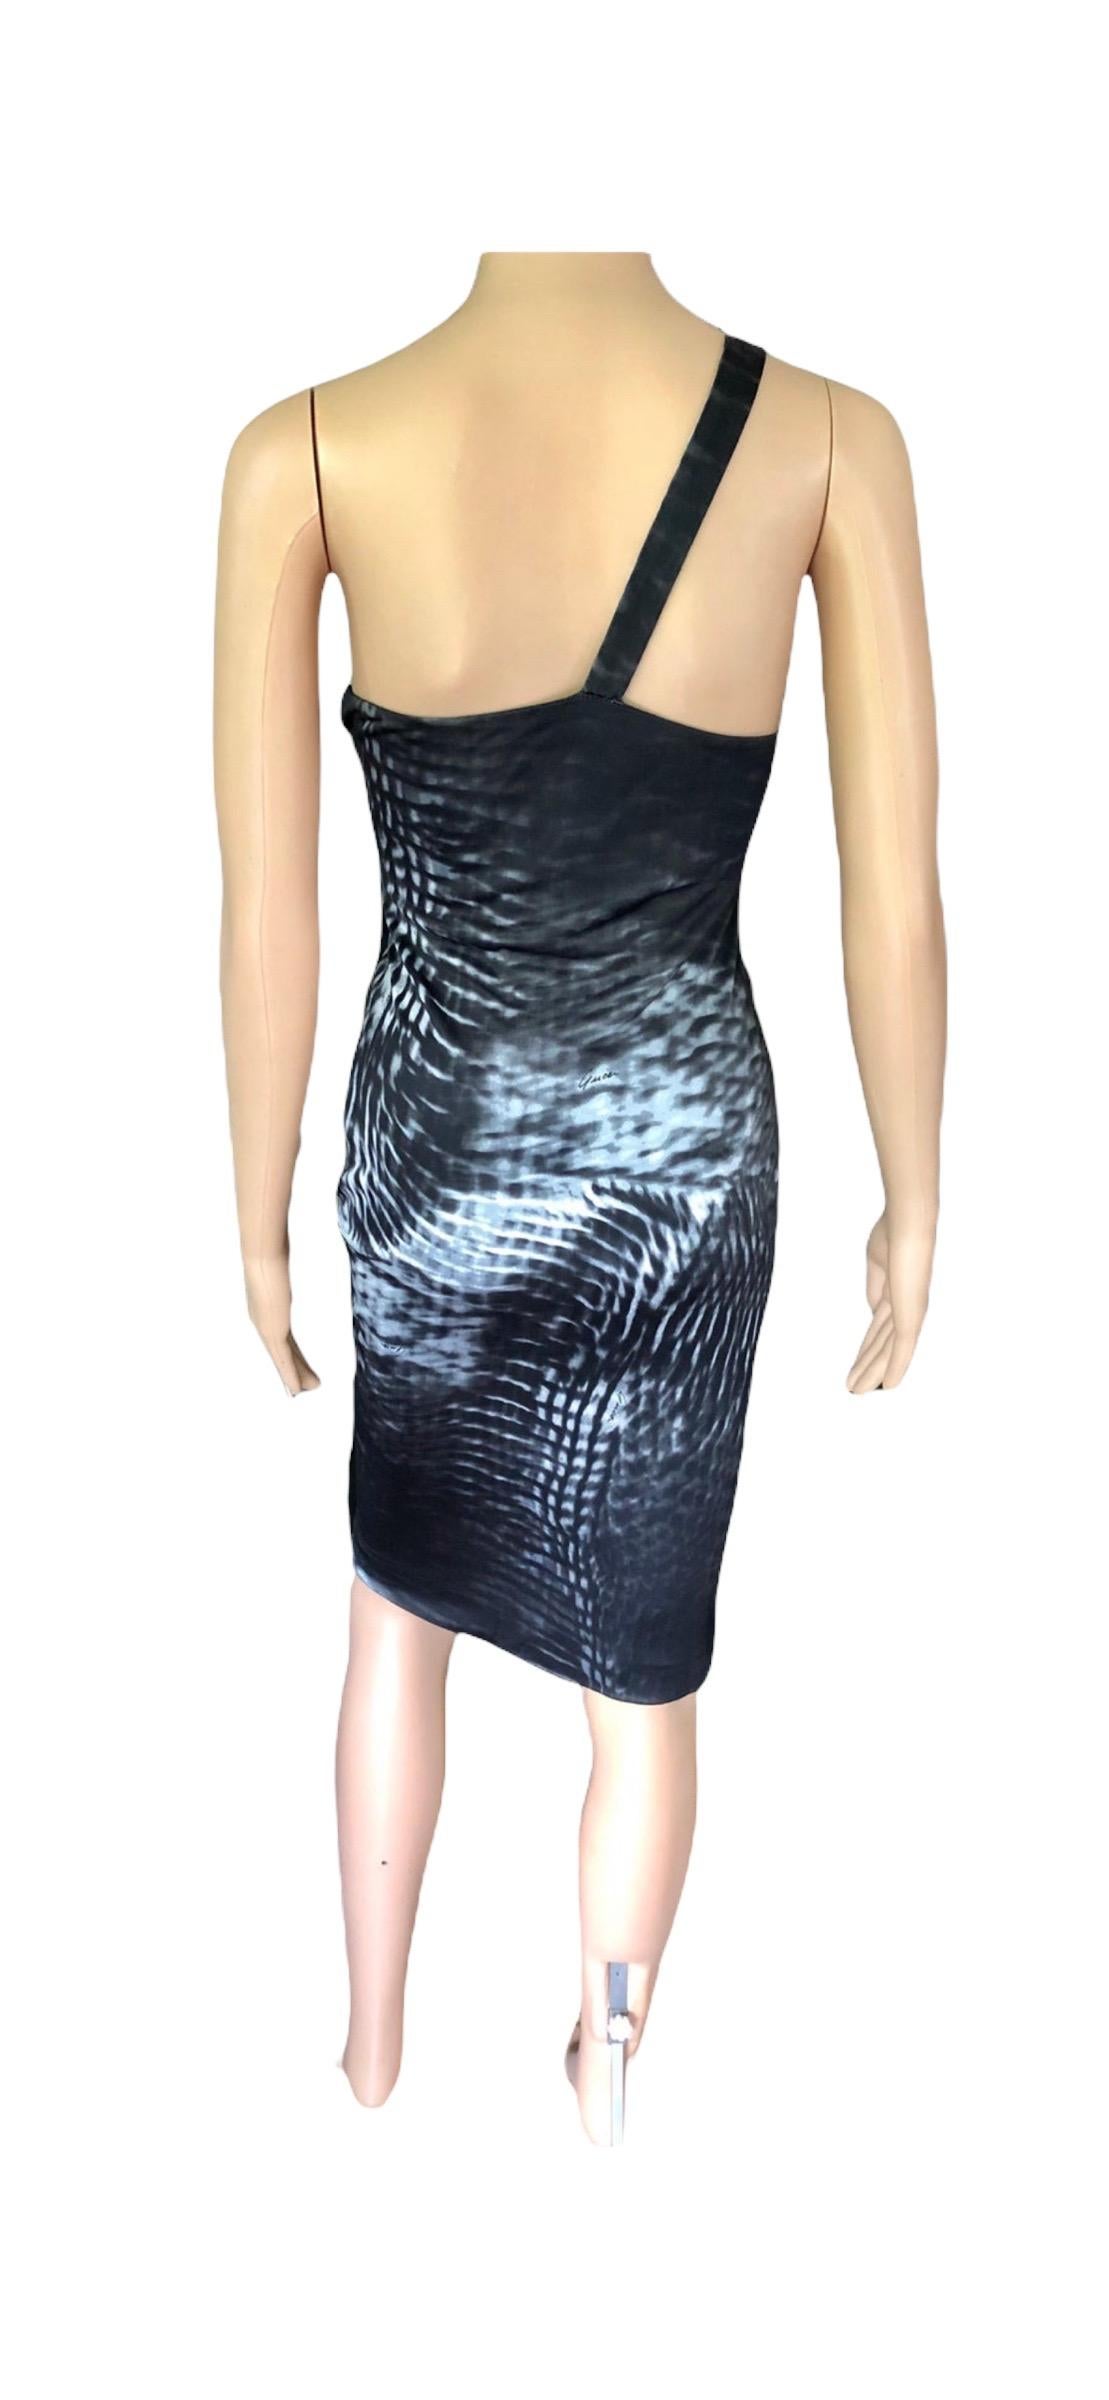 Tom Ford for Gucci S/S 2000 Runway One Shoulder Bodycon Knit Midi Dress 4